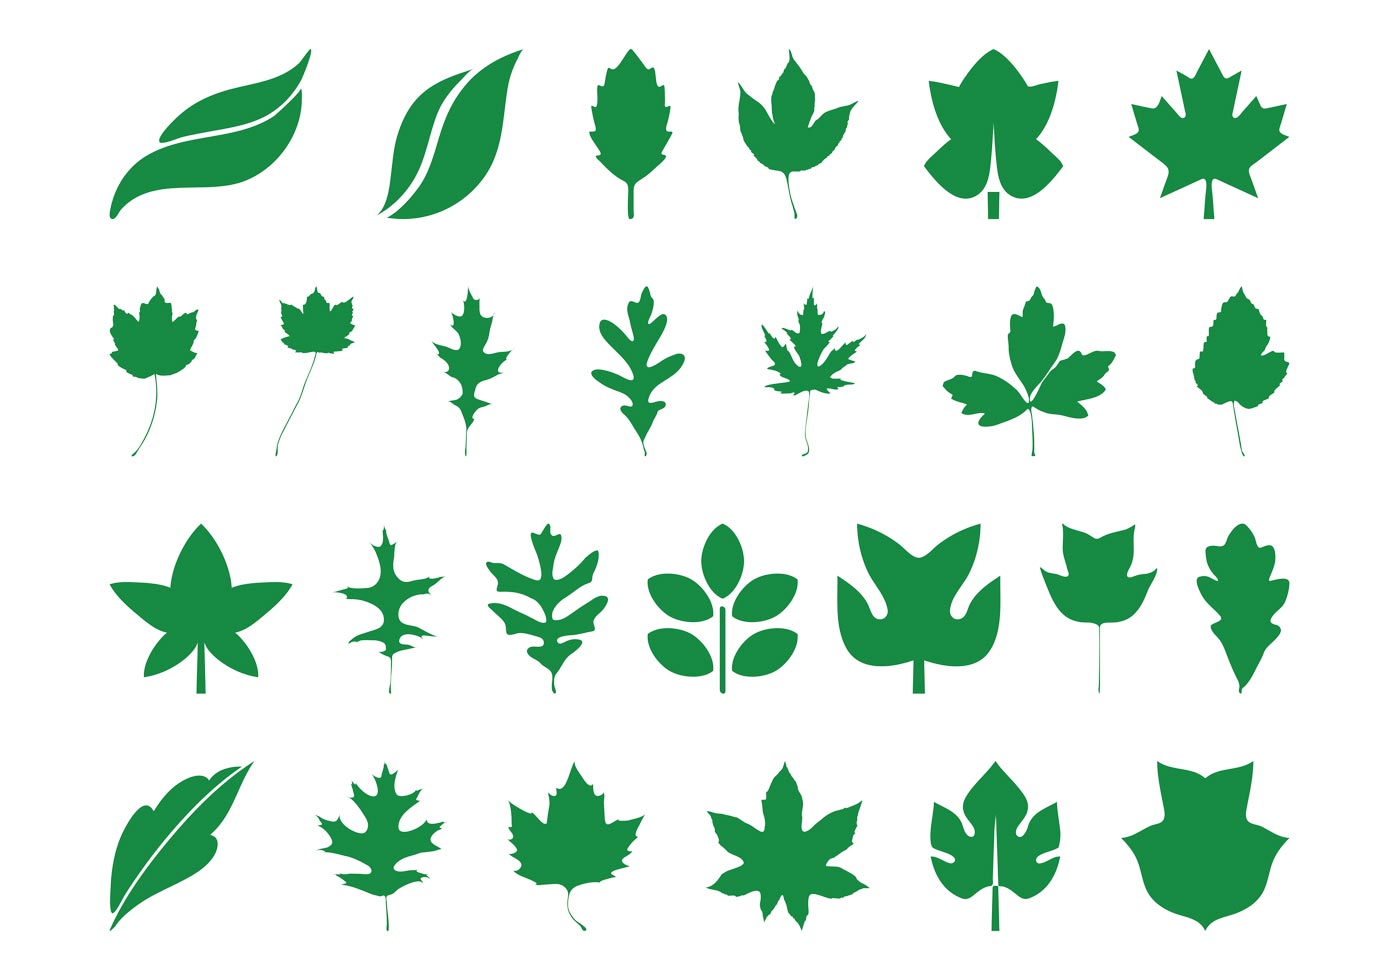 Download Leaves Silhouettes Set - Download Free Vector Art, Stock Graphics & Images